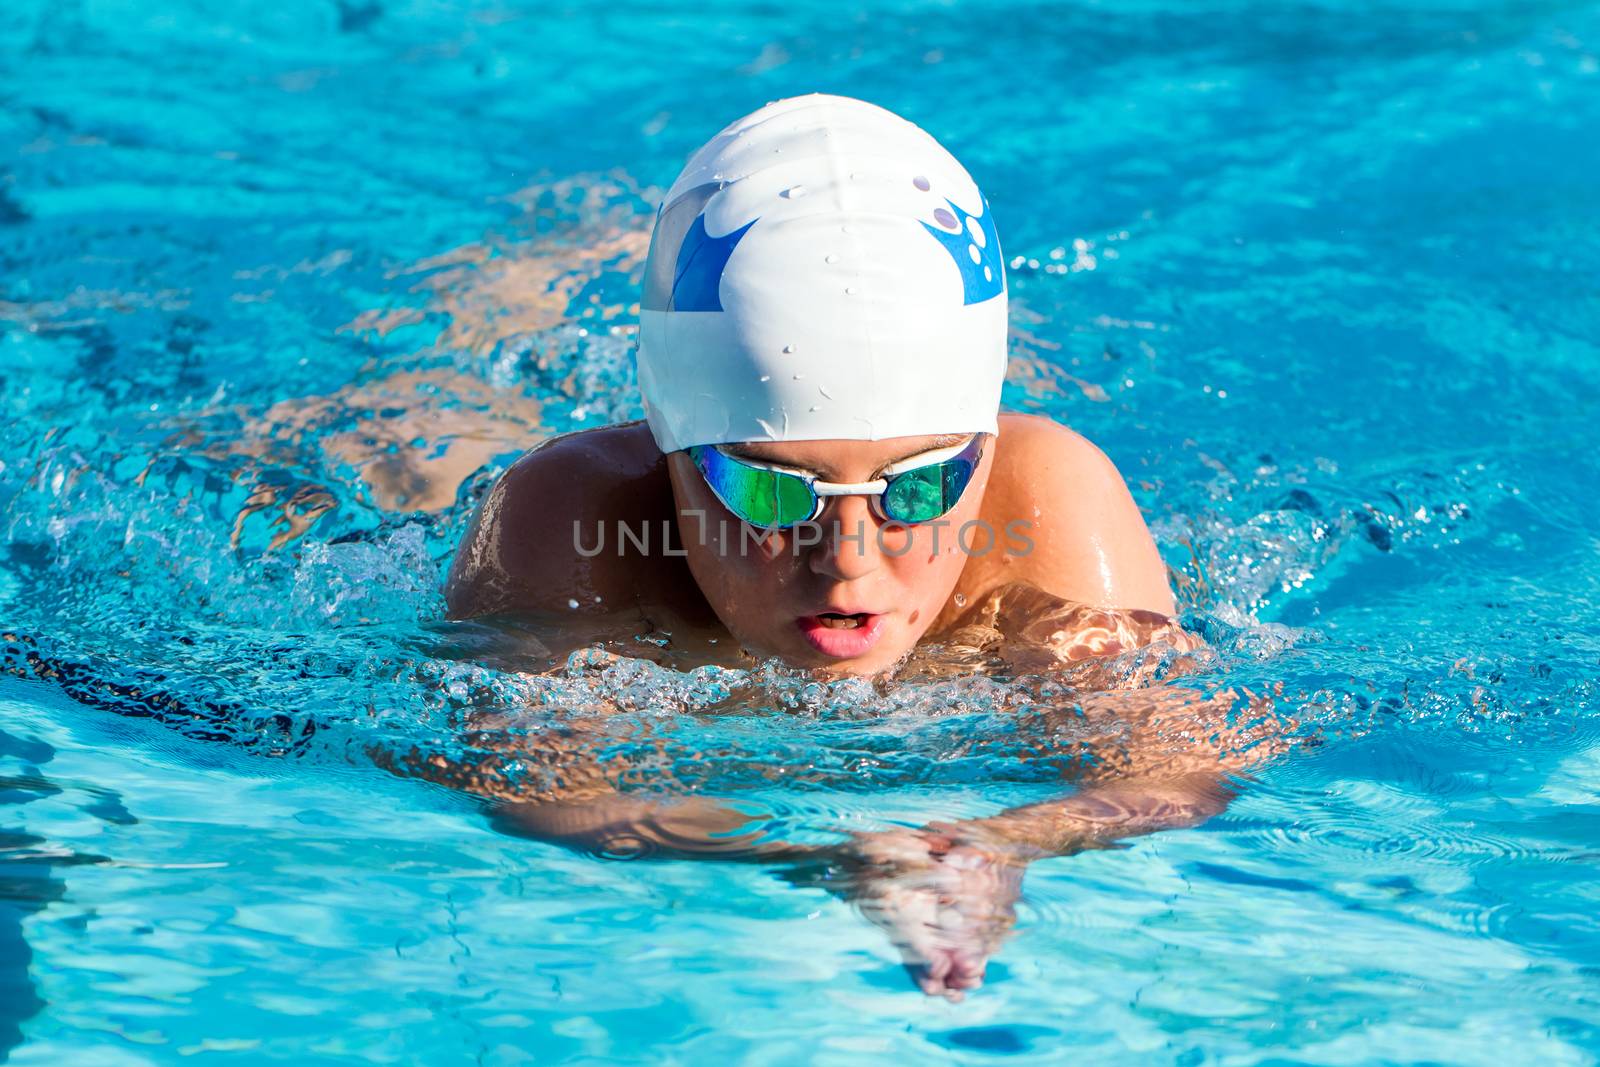 Close up action shot of young boy swimming breaststroke.